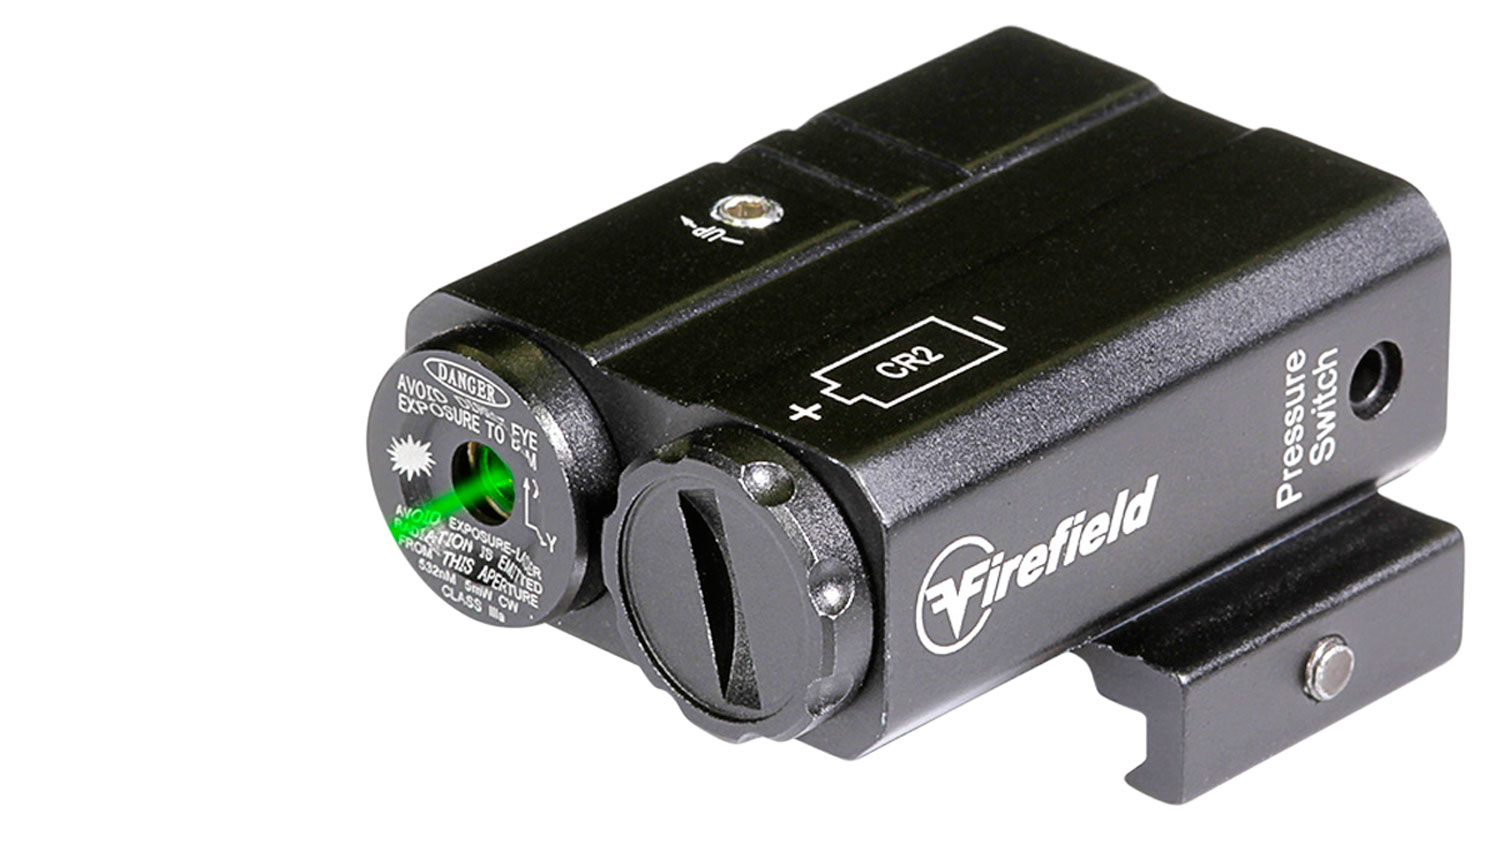 Firefield FF25007 Charge  5mW Green Laser 532nM Wavelength (50 yds Day/600 yds Night Range) Matte Black Finish for AR-Platform Includes Pressure Pad & Battery